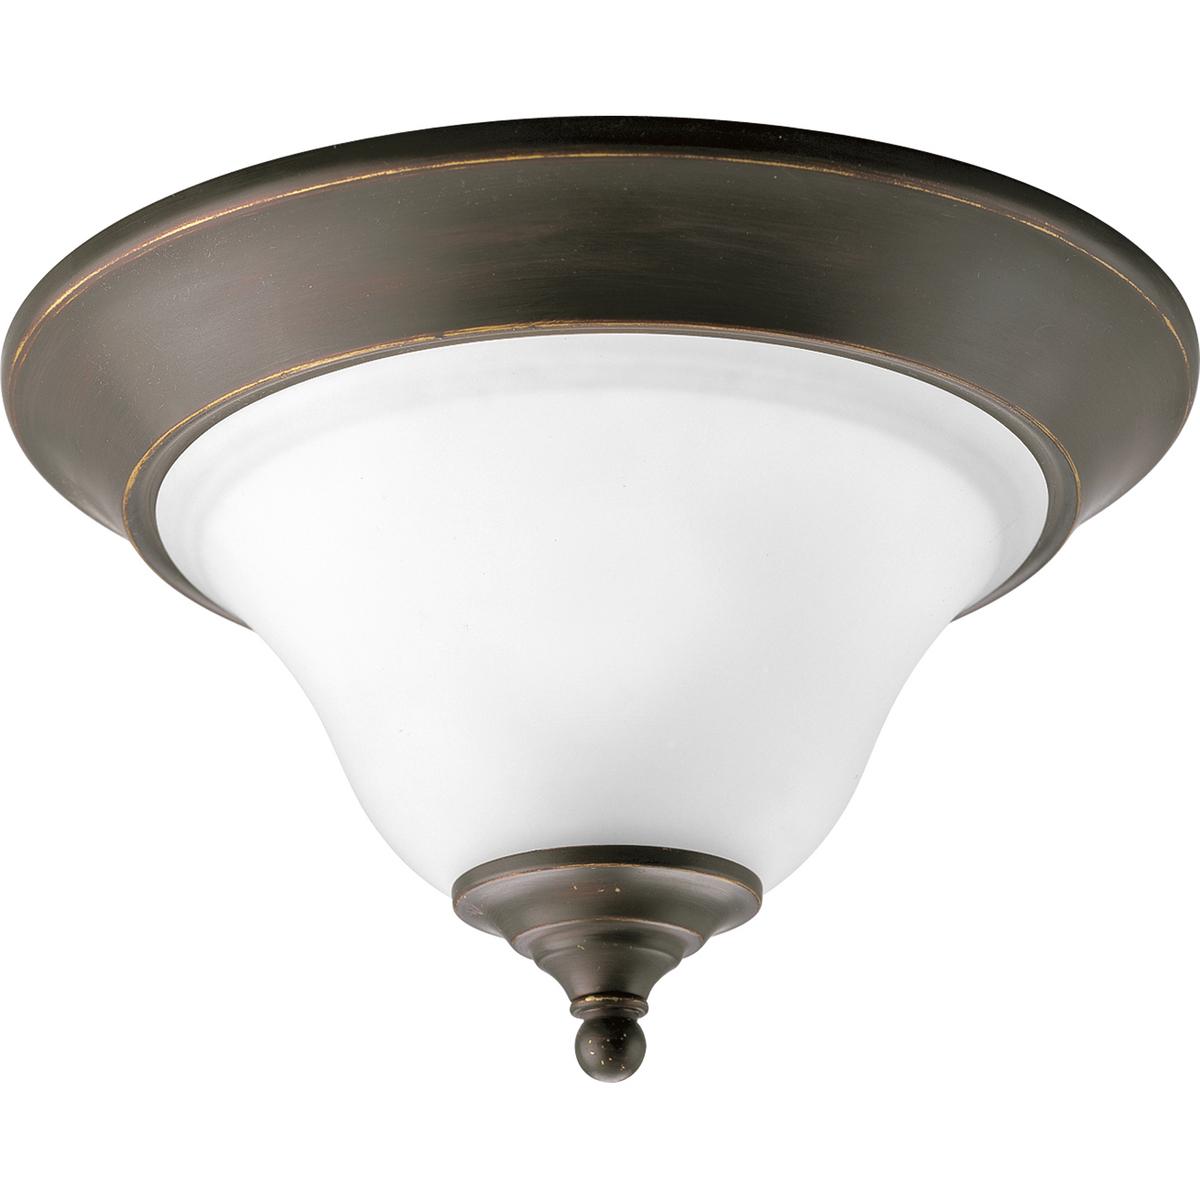 Hubbell P3475-20 One-light close-to-ceiling fixture featuring soft angles, curving lines and etched glass shades. Gracefully exotic, the Trinity Collection offers classic sophistication for transitional interiors. Sculptural forms of metal and glass are enhanced by a clas